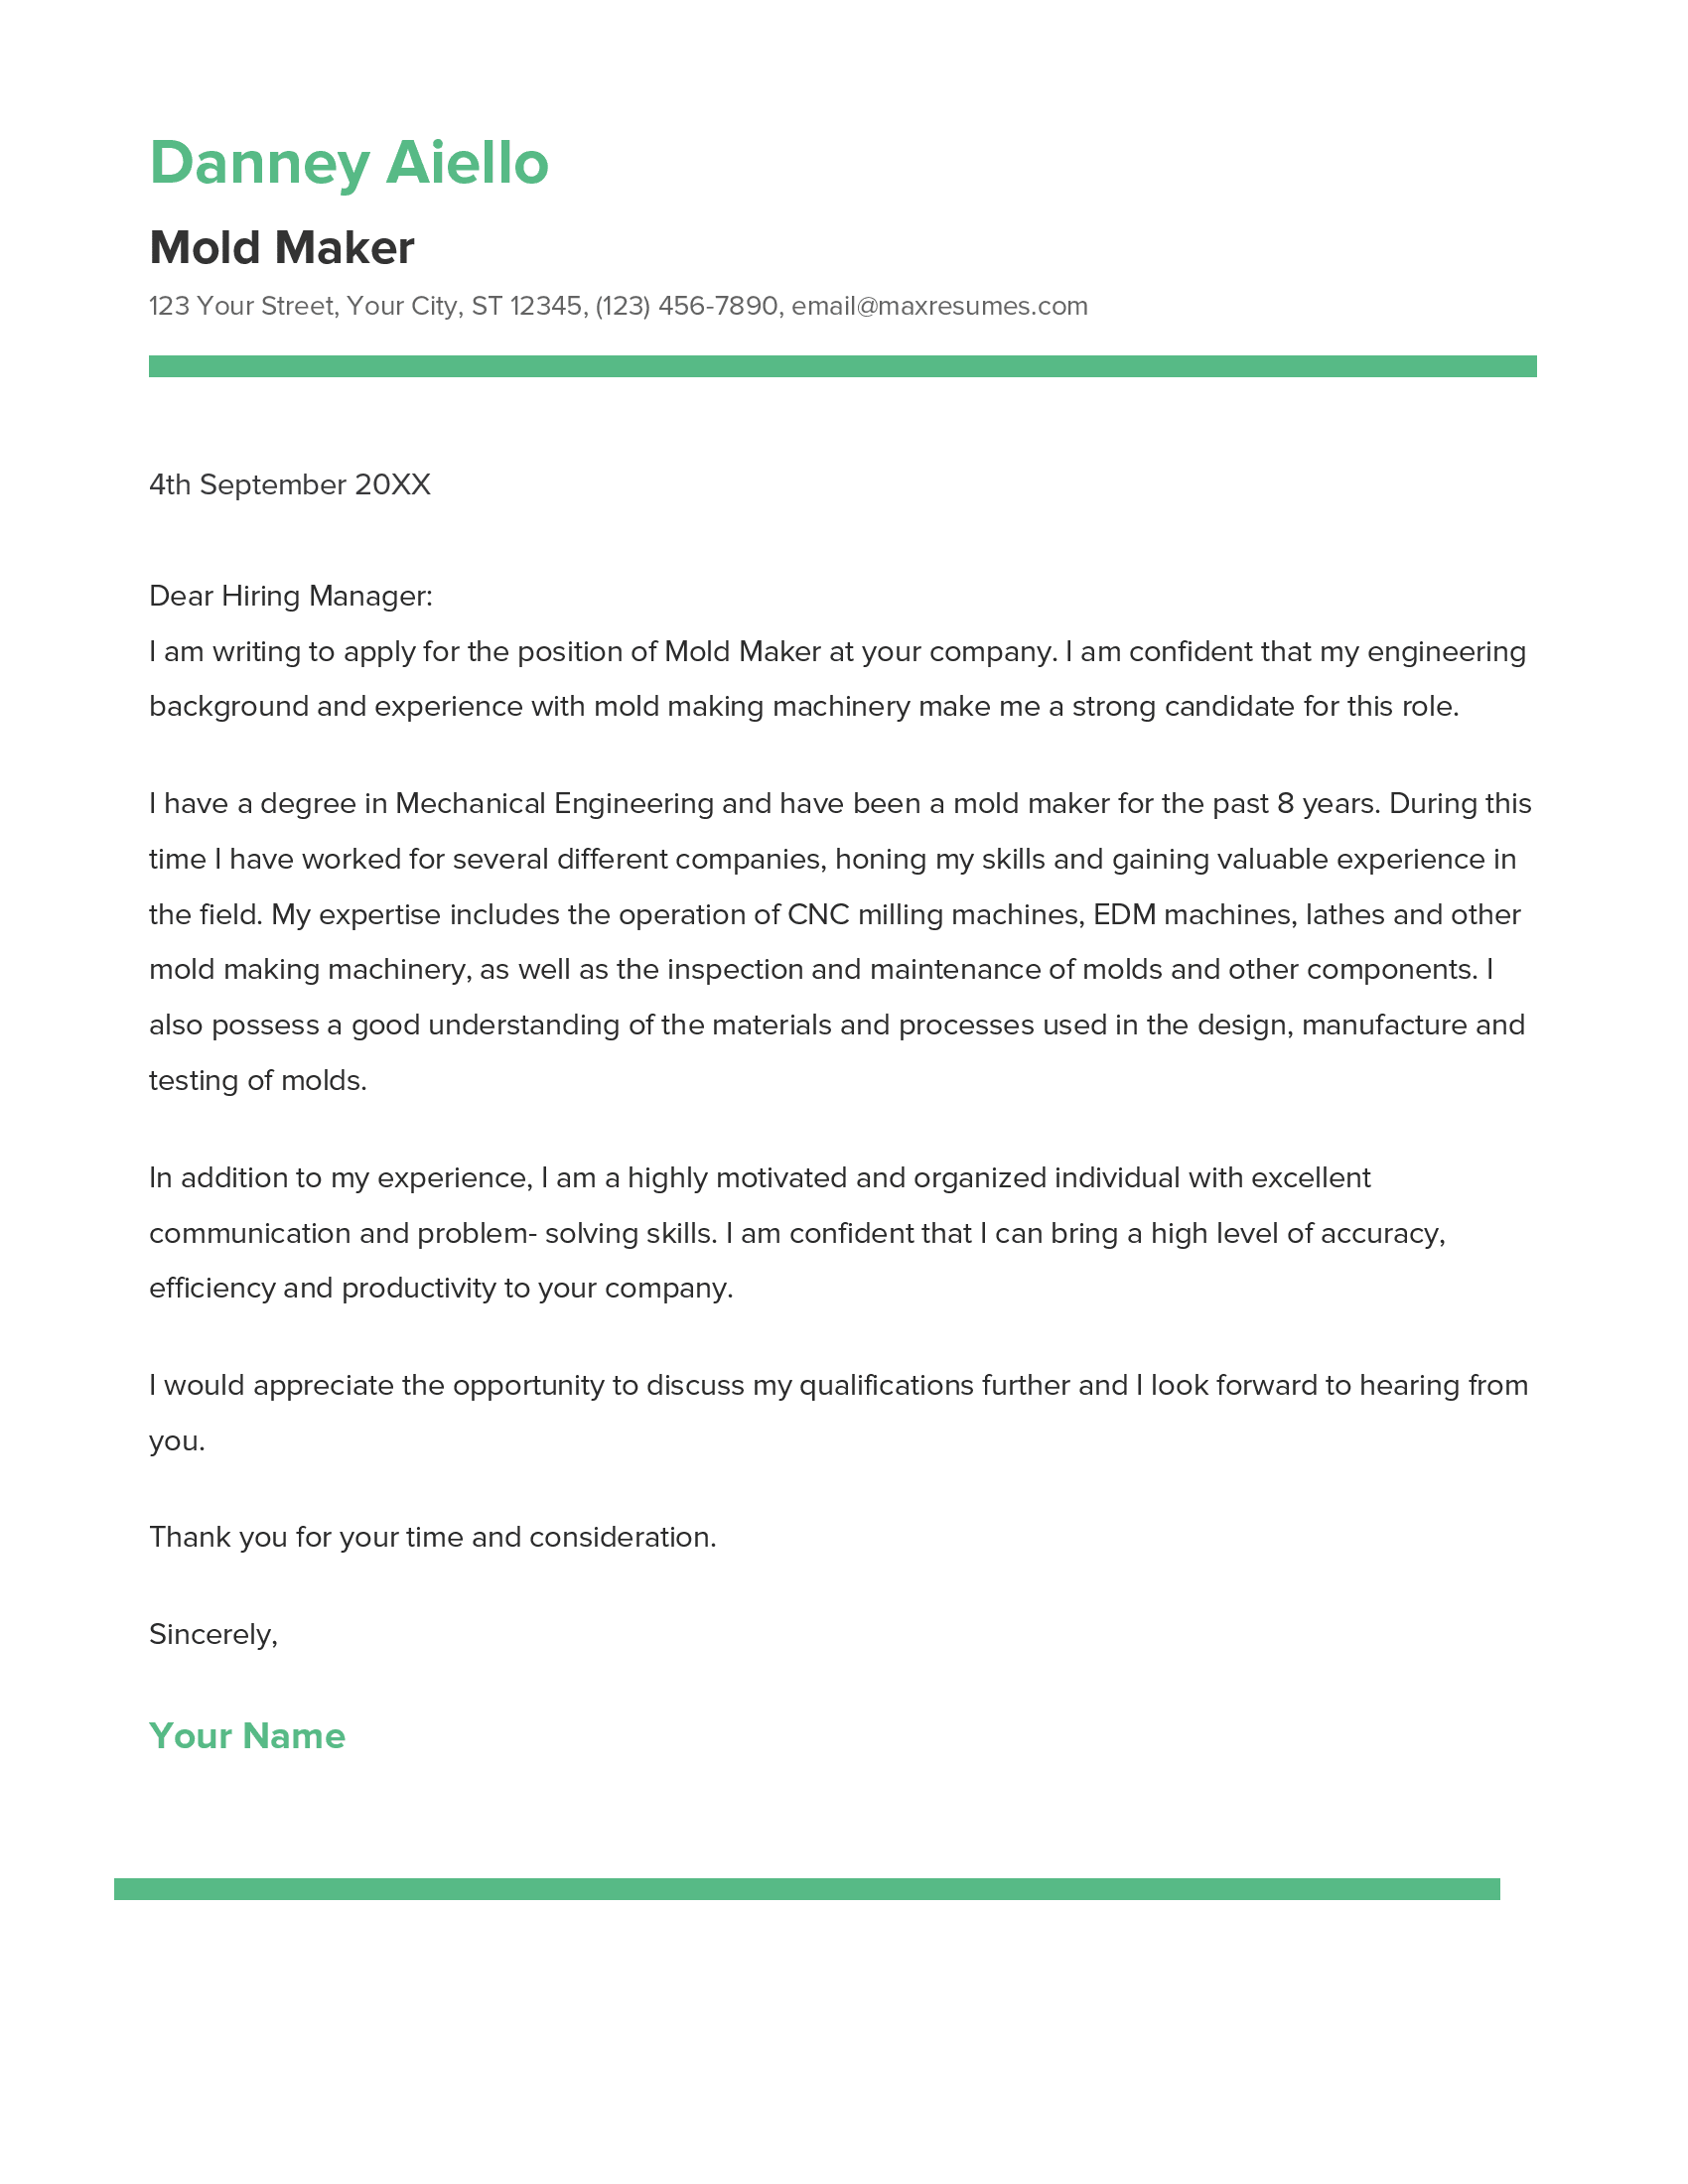 Mold Maker Cover Letter Example